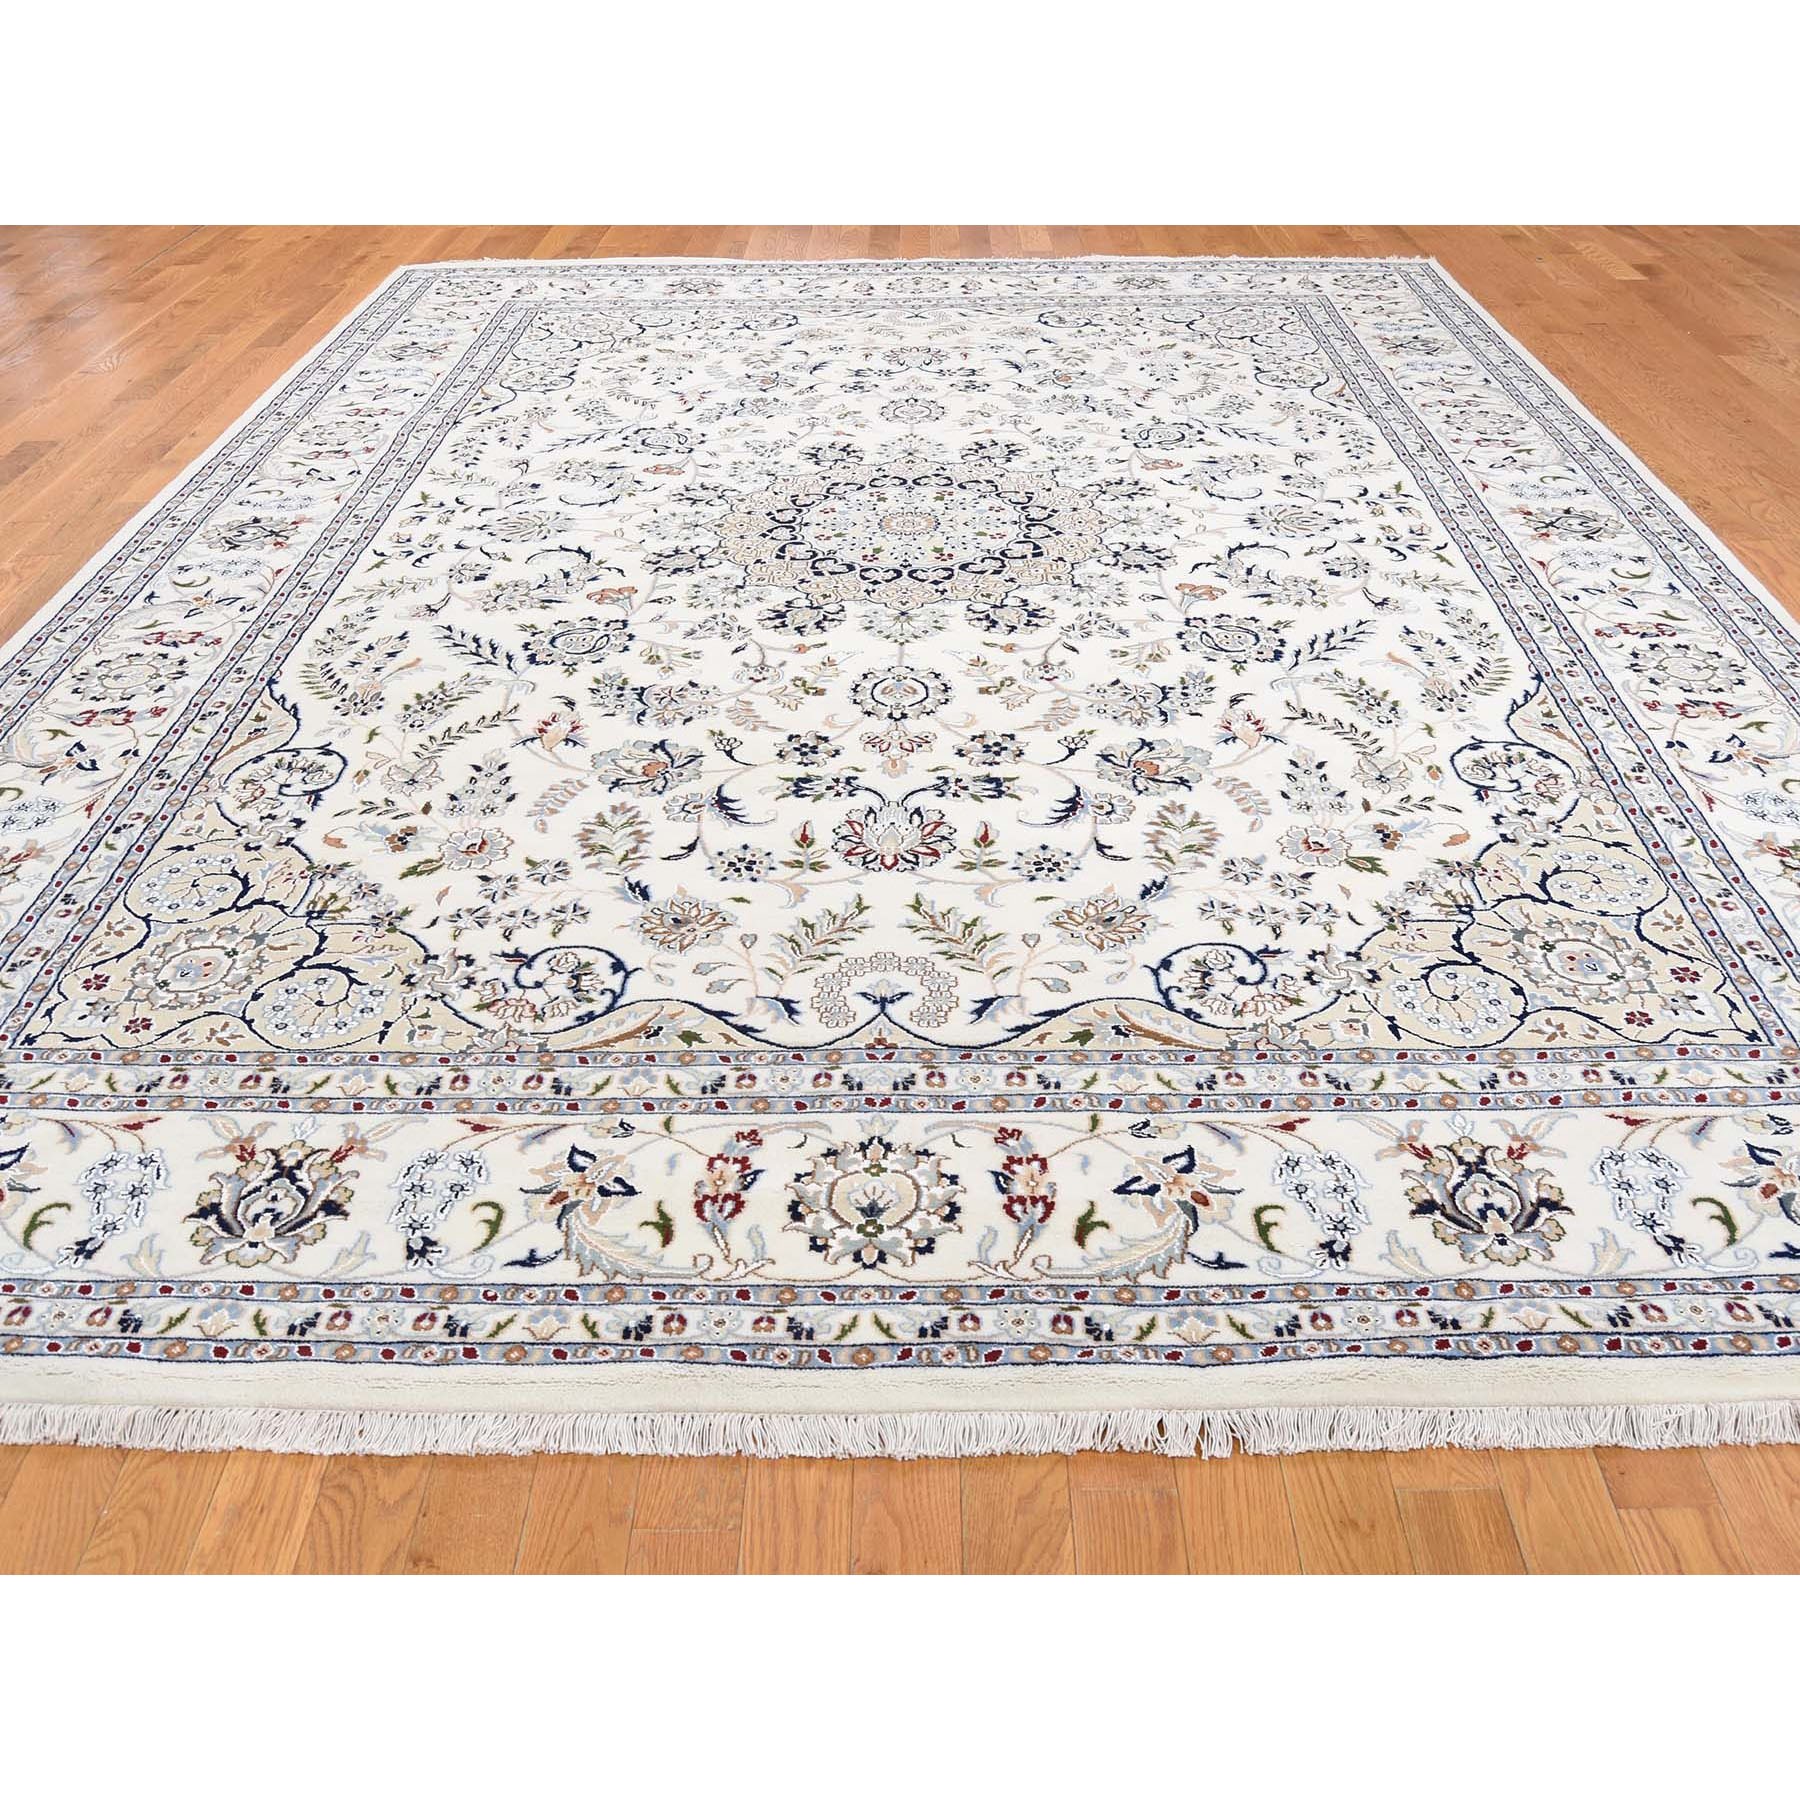 9-1 x12-1  Wool And Silk 250 KPSI Ivory Nain Hand Knotted Oriental Rug 